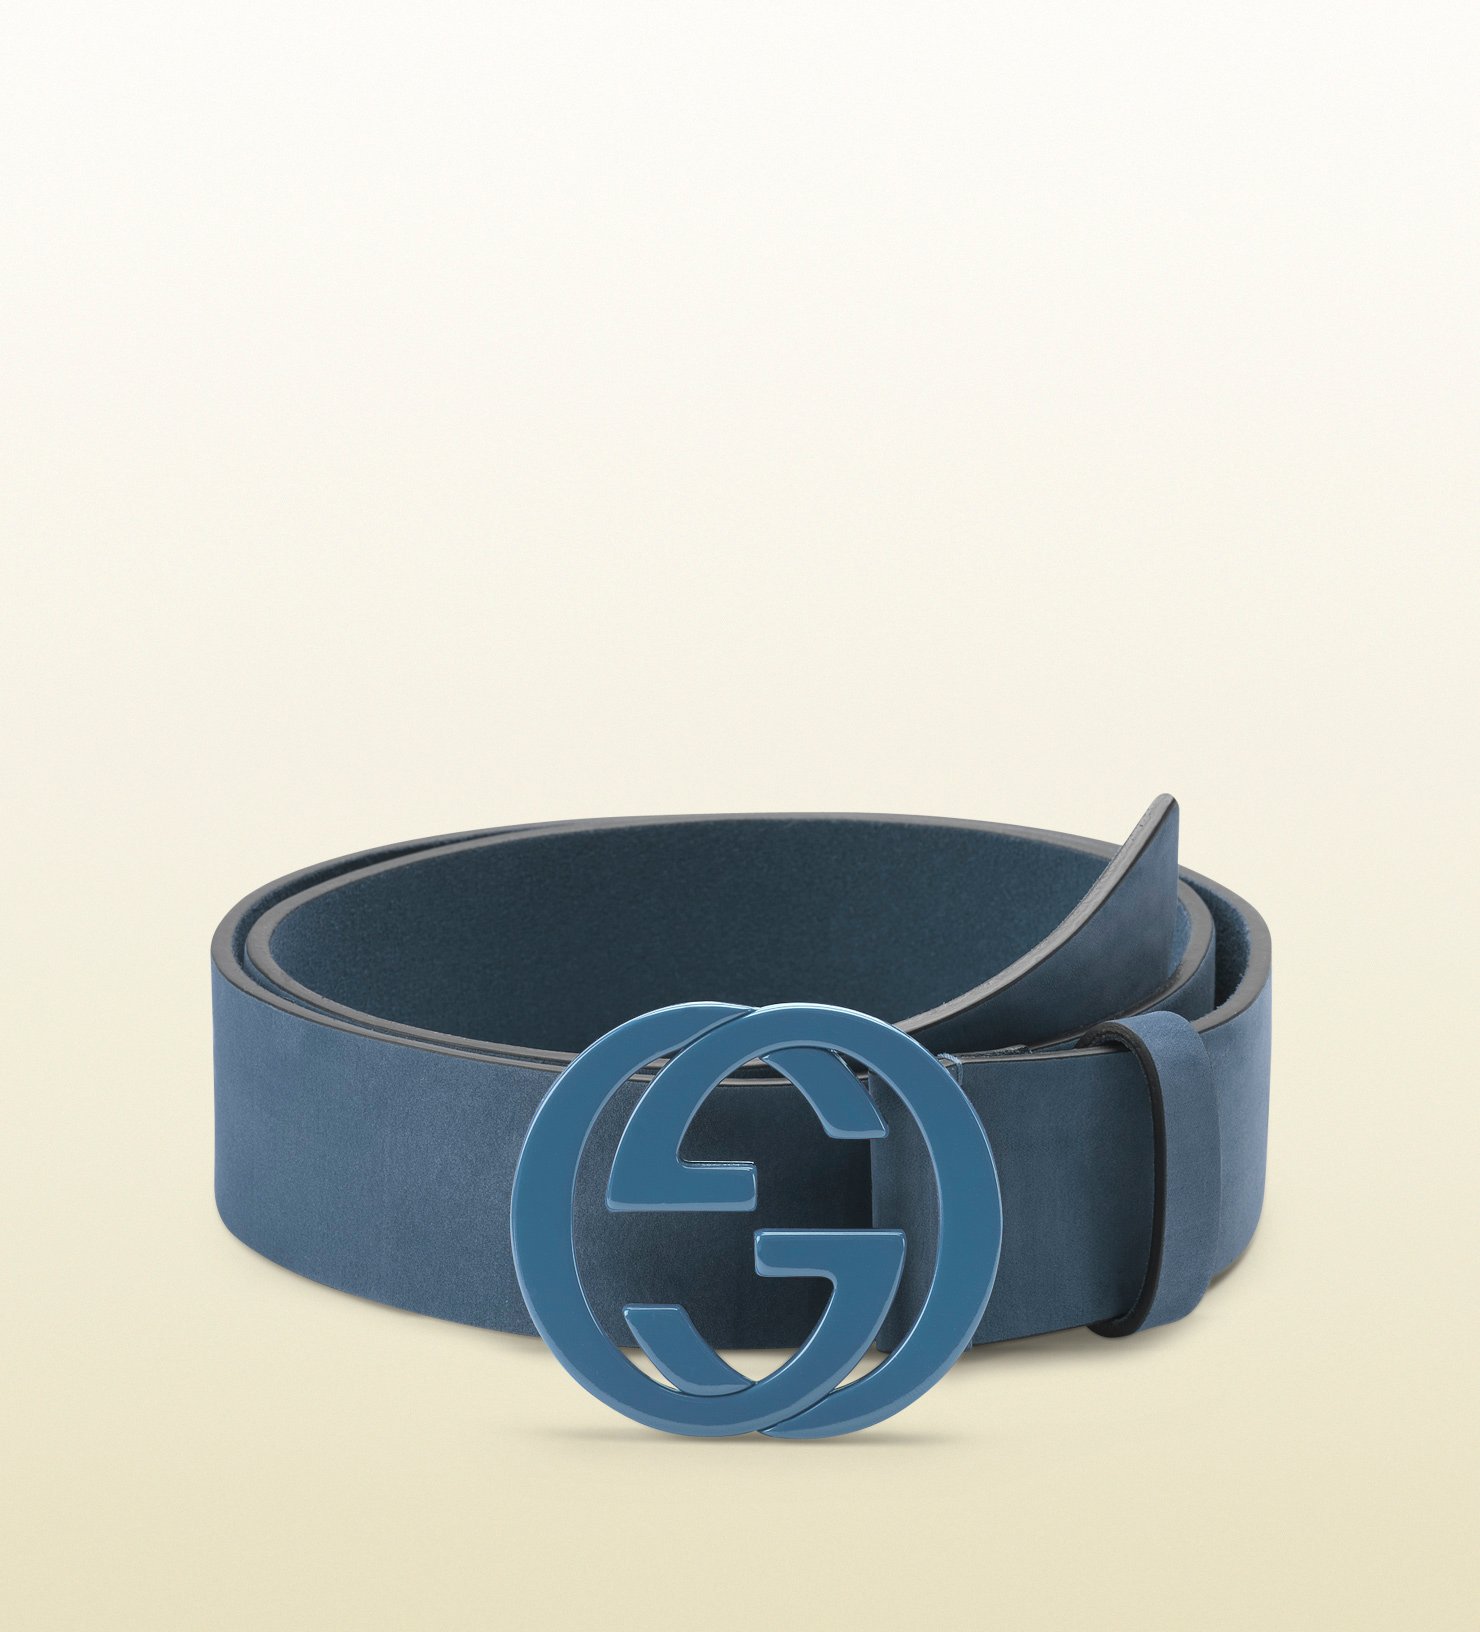 Lyst - Gucci Sky Blue Leather Belt with Interlocking G Buckle in Blue for Men